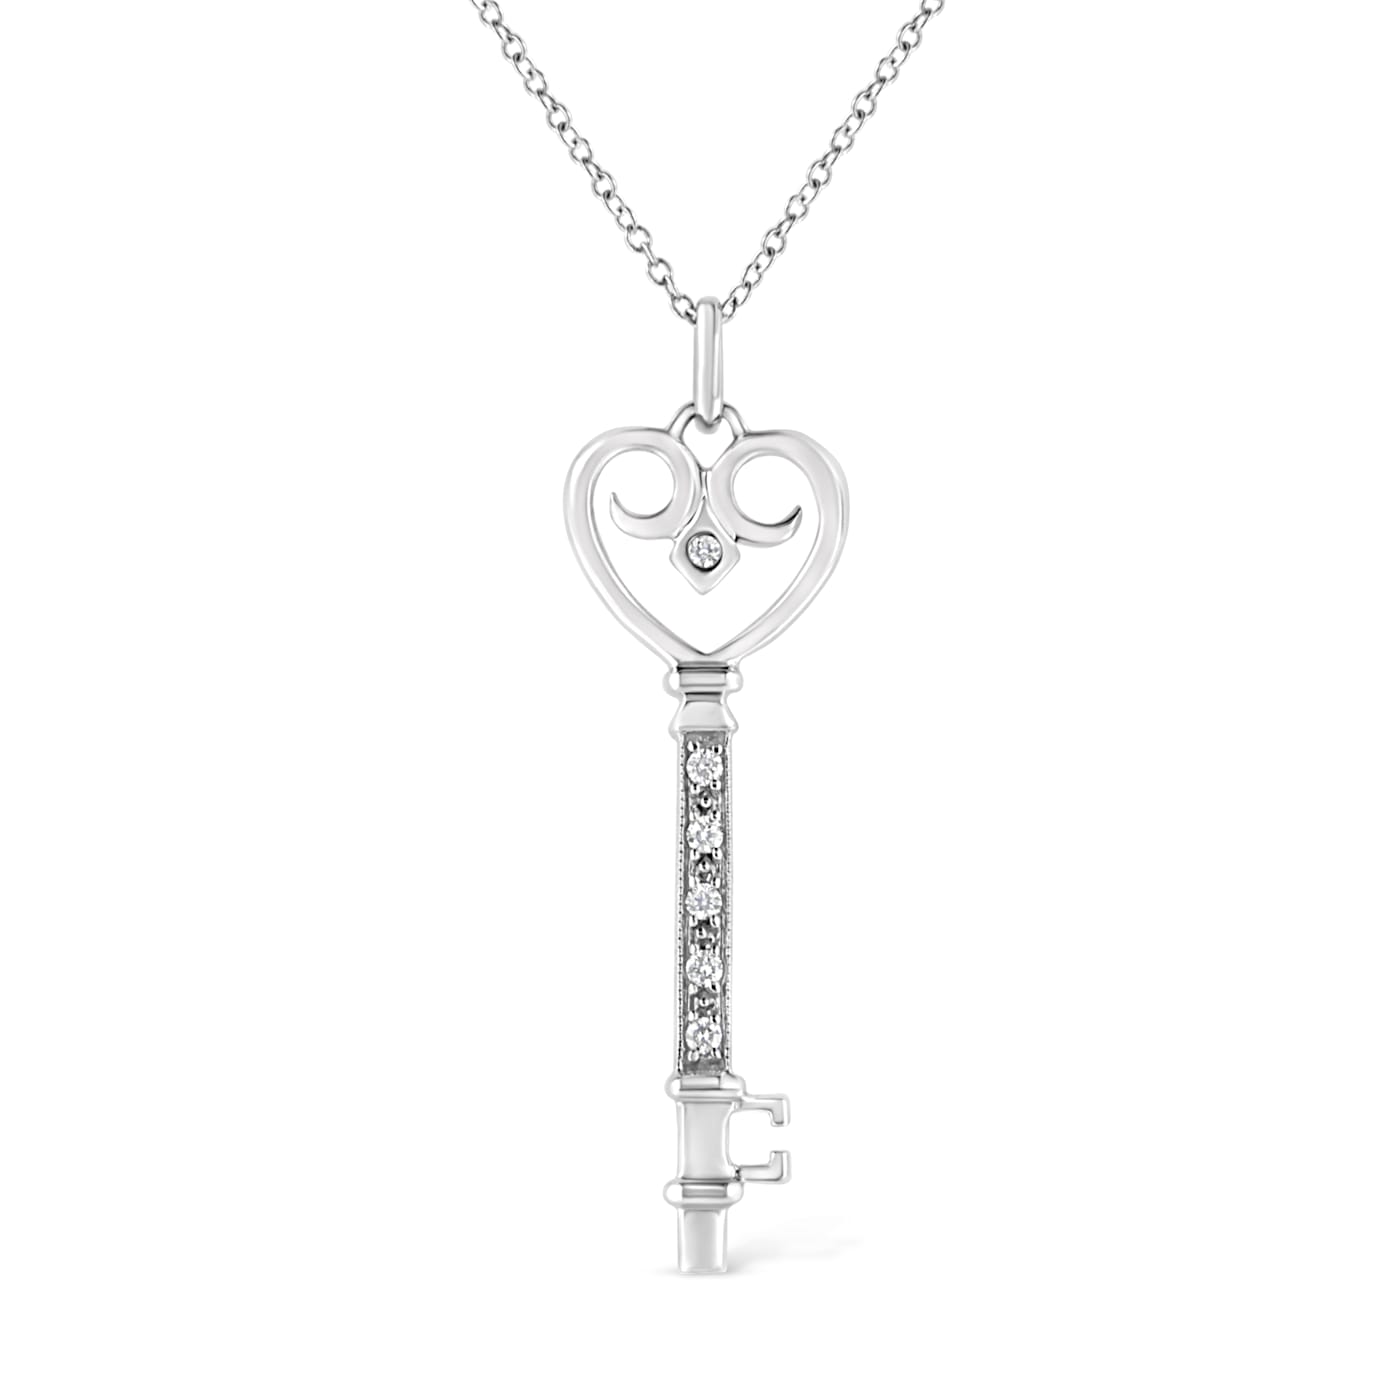 Black & White Diamond Heart Lock & Key Necklace in Sterling Silver - The  Black Bow Jewelry Company